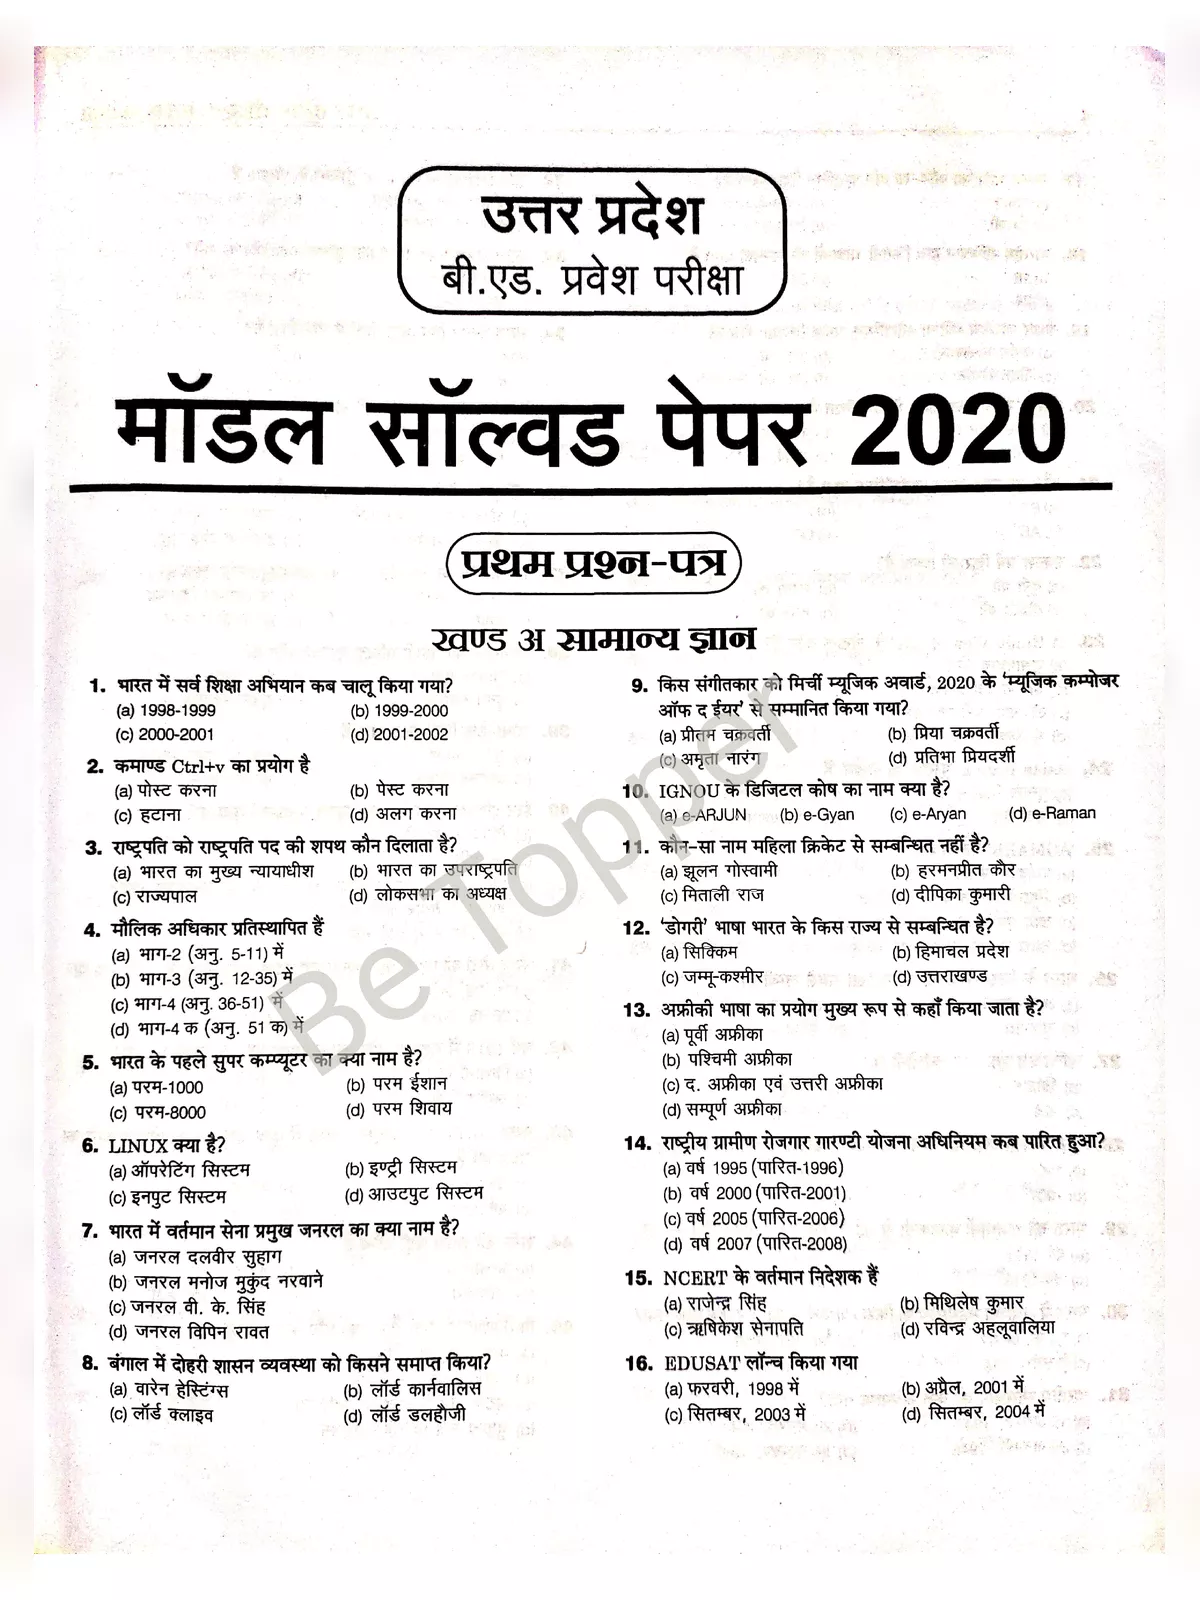 UP B.Ed Previous Year Questions Papers